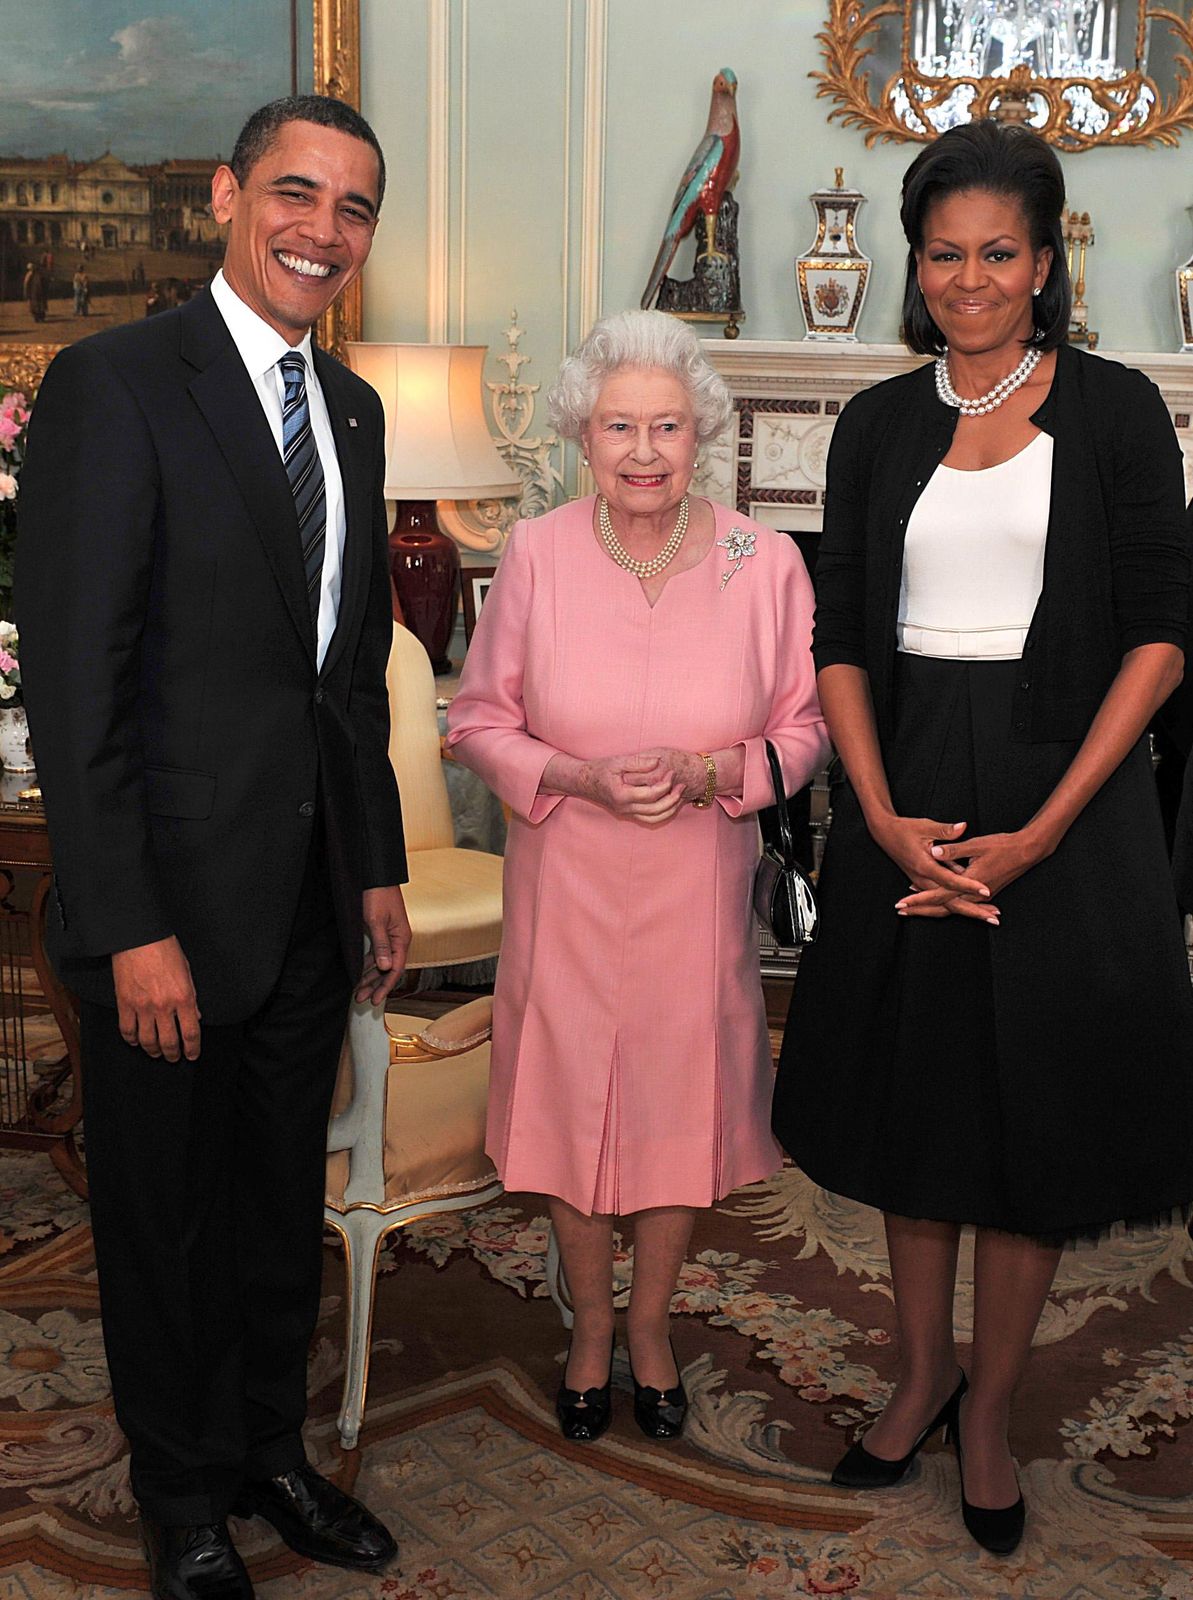 Barack Obama and his wife, Michelle Obama pose with Queen Elizabeth II at a reception at Buckingham Palace on April 1, 2009. | Photo: Getty Images.